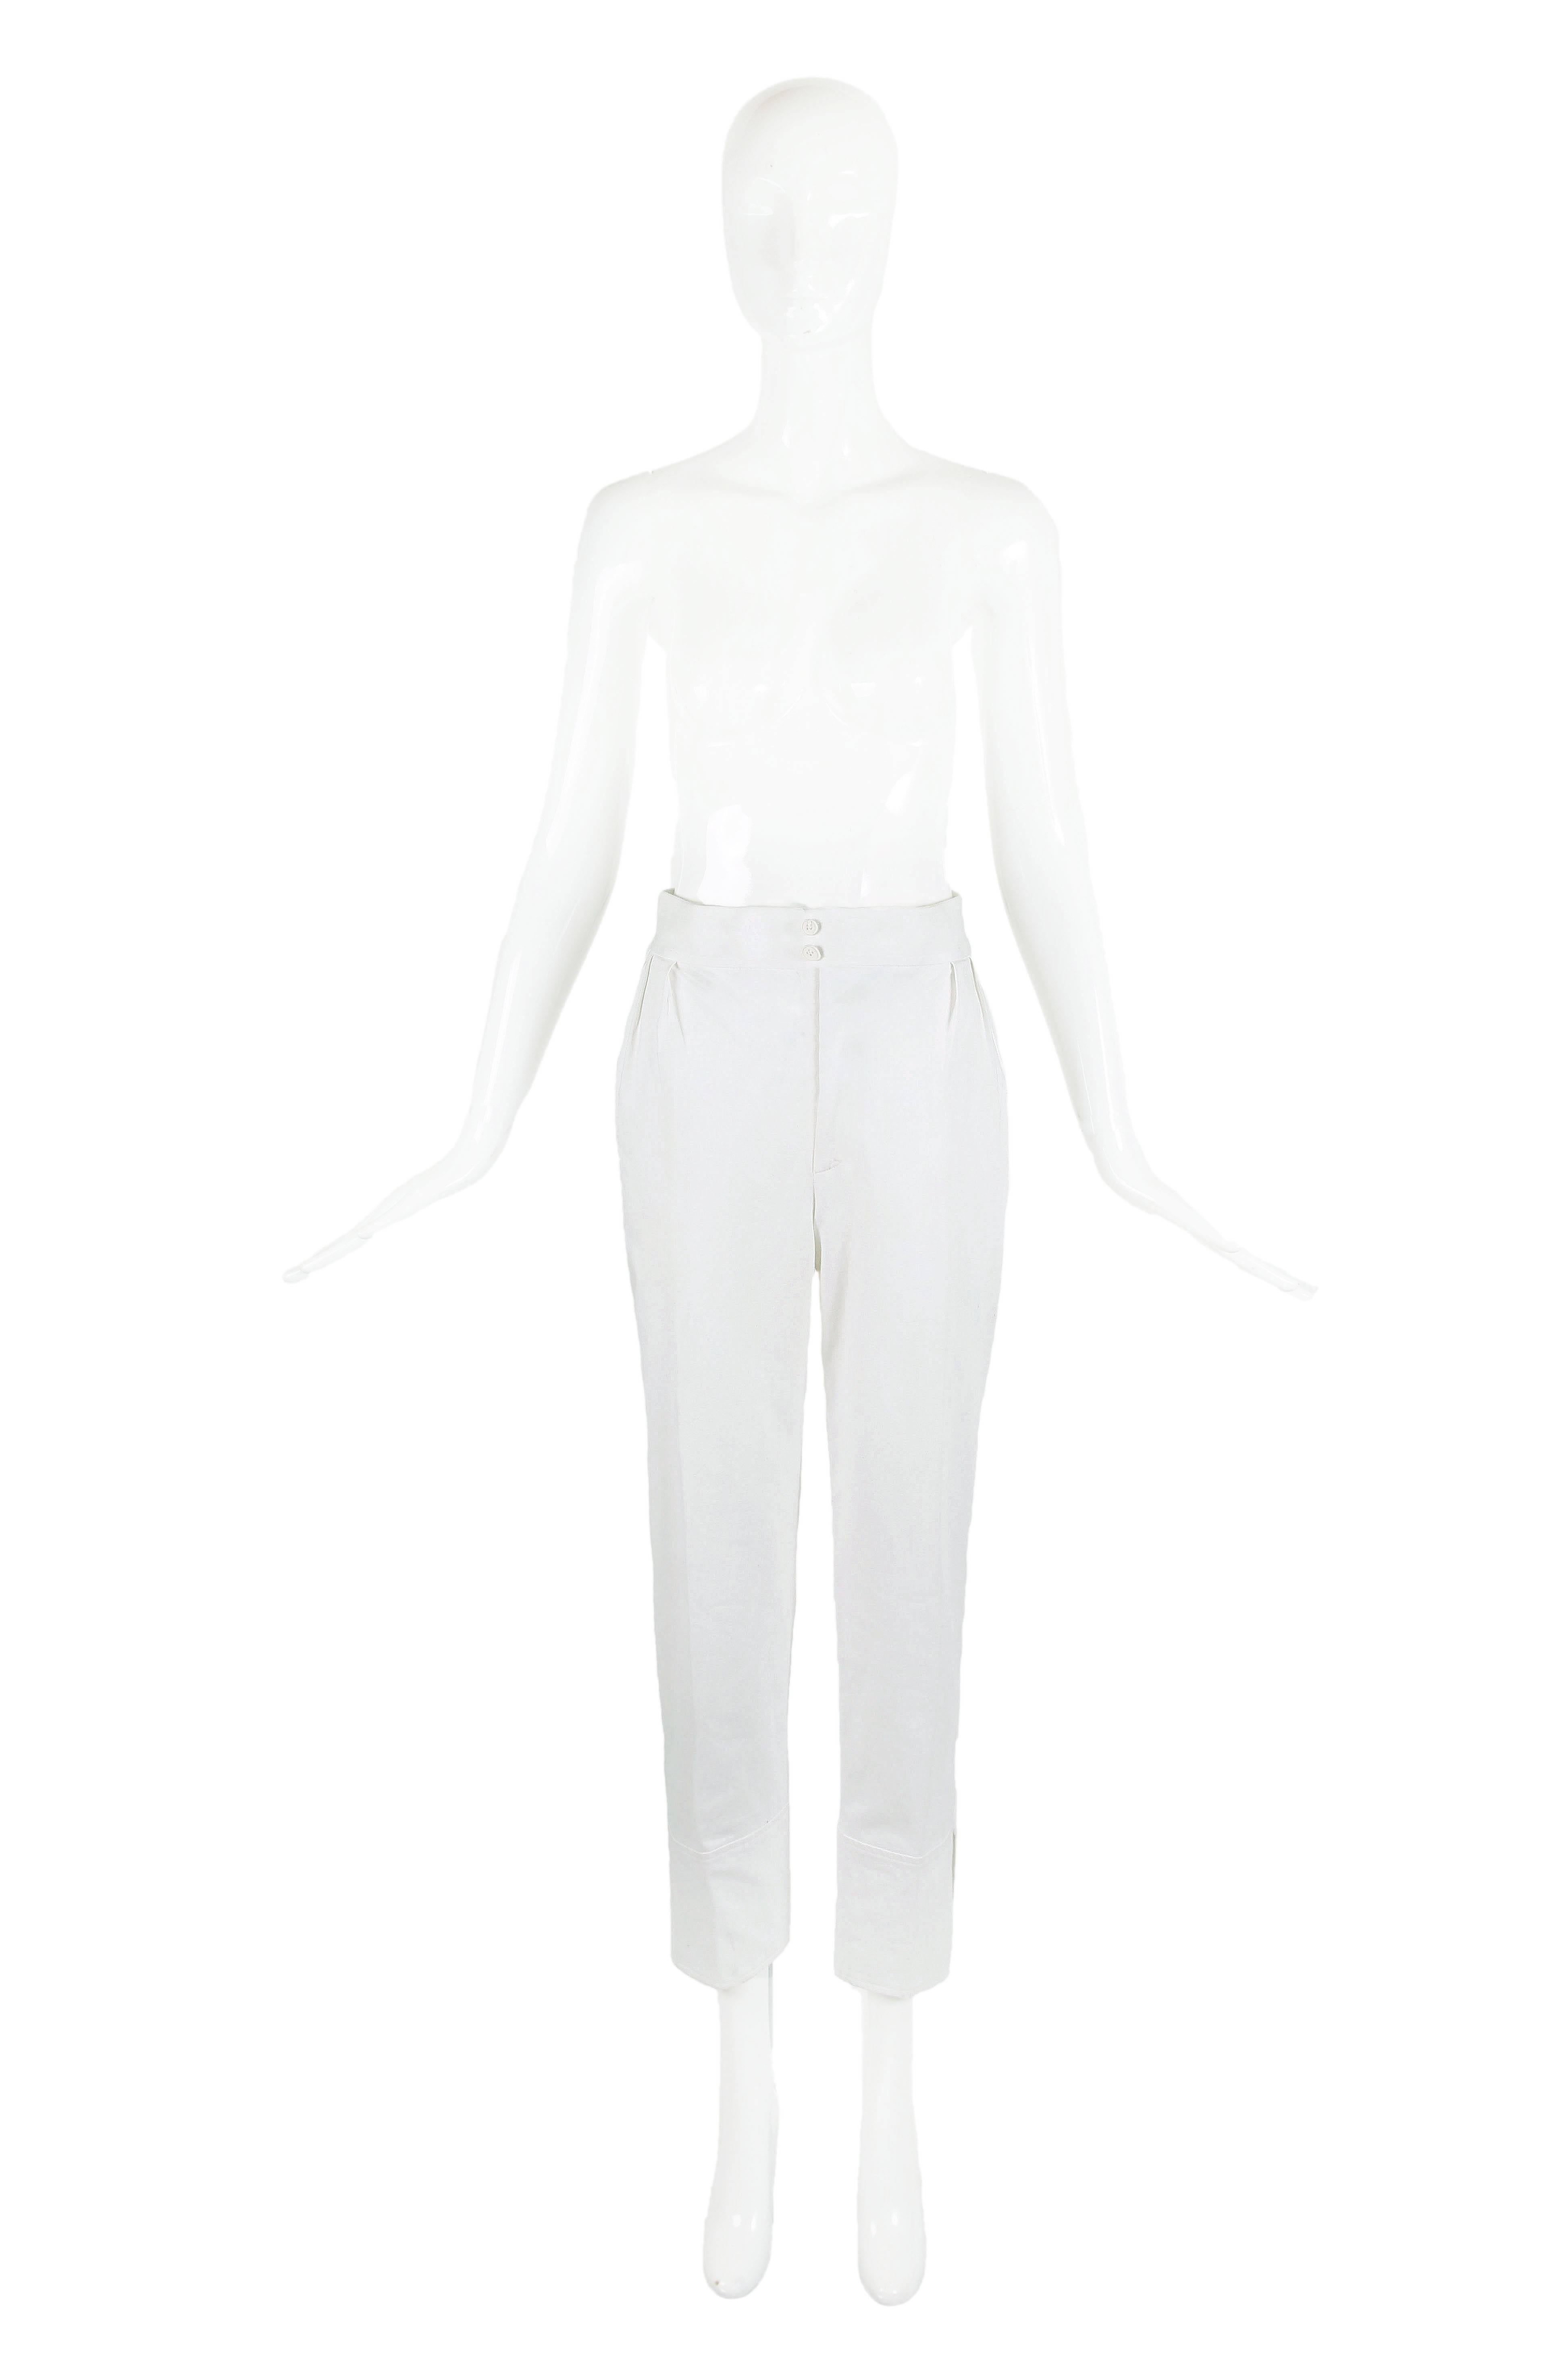 Vintage Yves Saint Laurent white cotton cargo pants with two hidden side pockets and tapered cuffs featuring slits. In excellent condition - size tag 36, please consult measurements. 
MEASUREMENTS:
Waist - 24